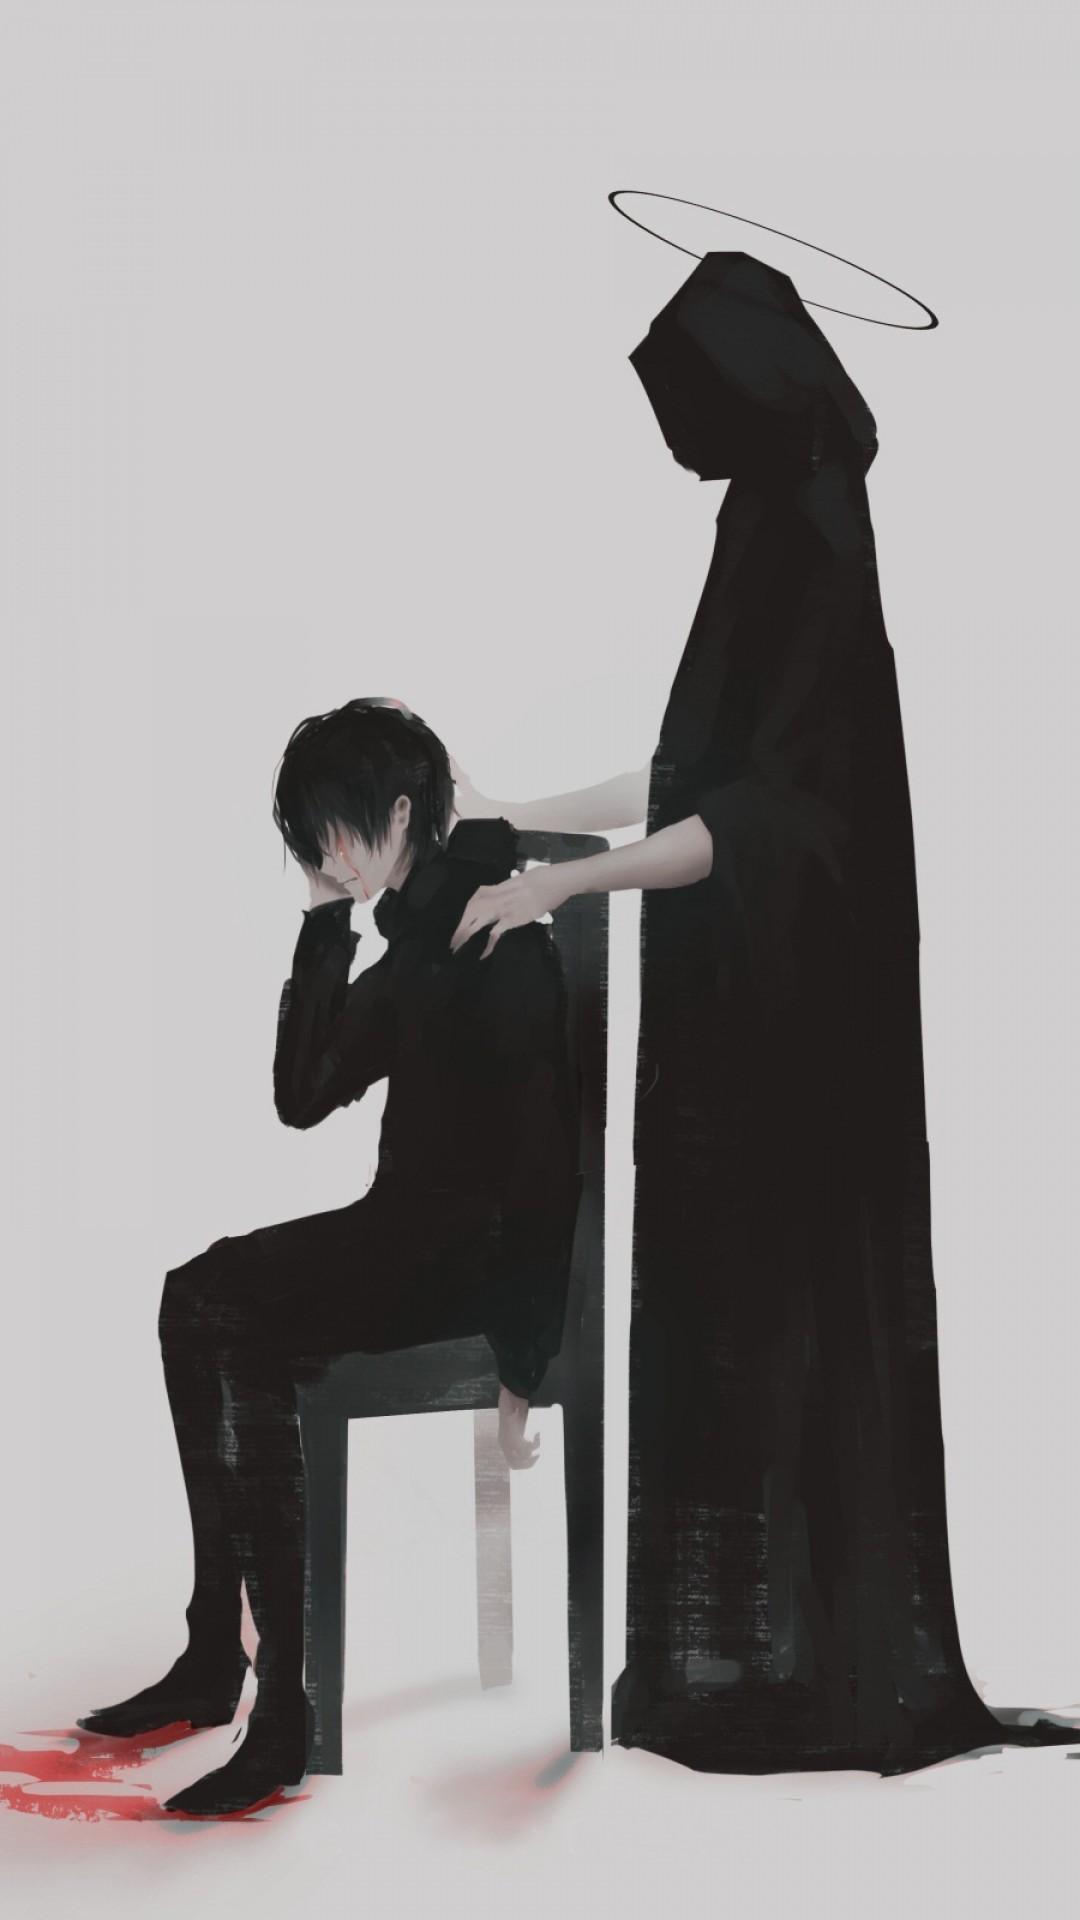 Download 1080x1920 Anime Boy, The Reaper, Sad Wallpapers for